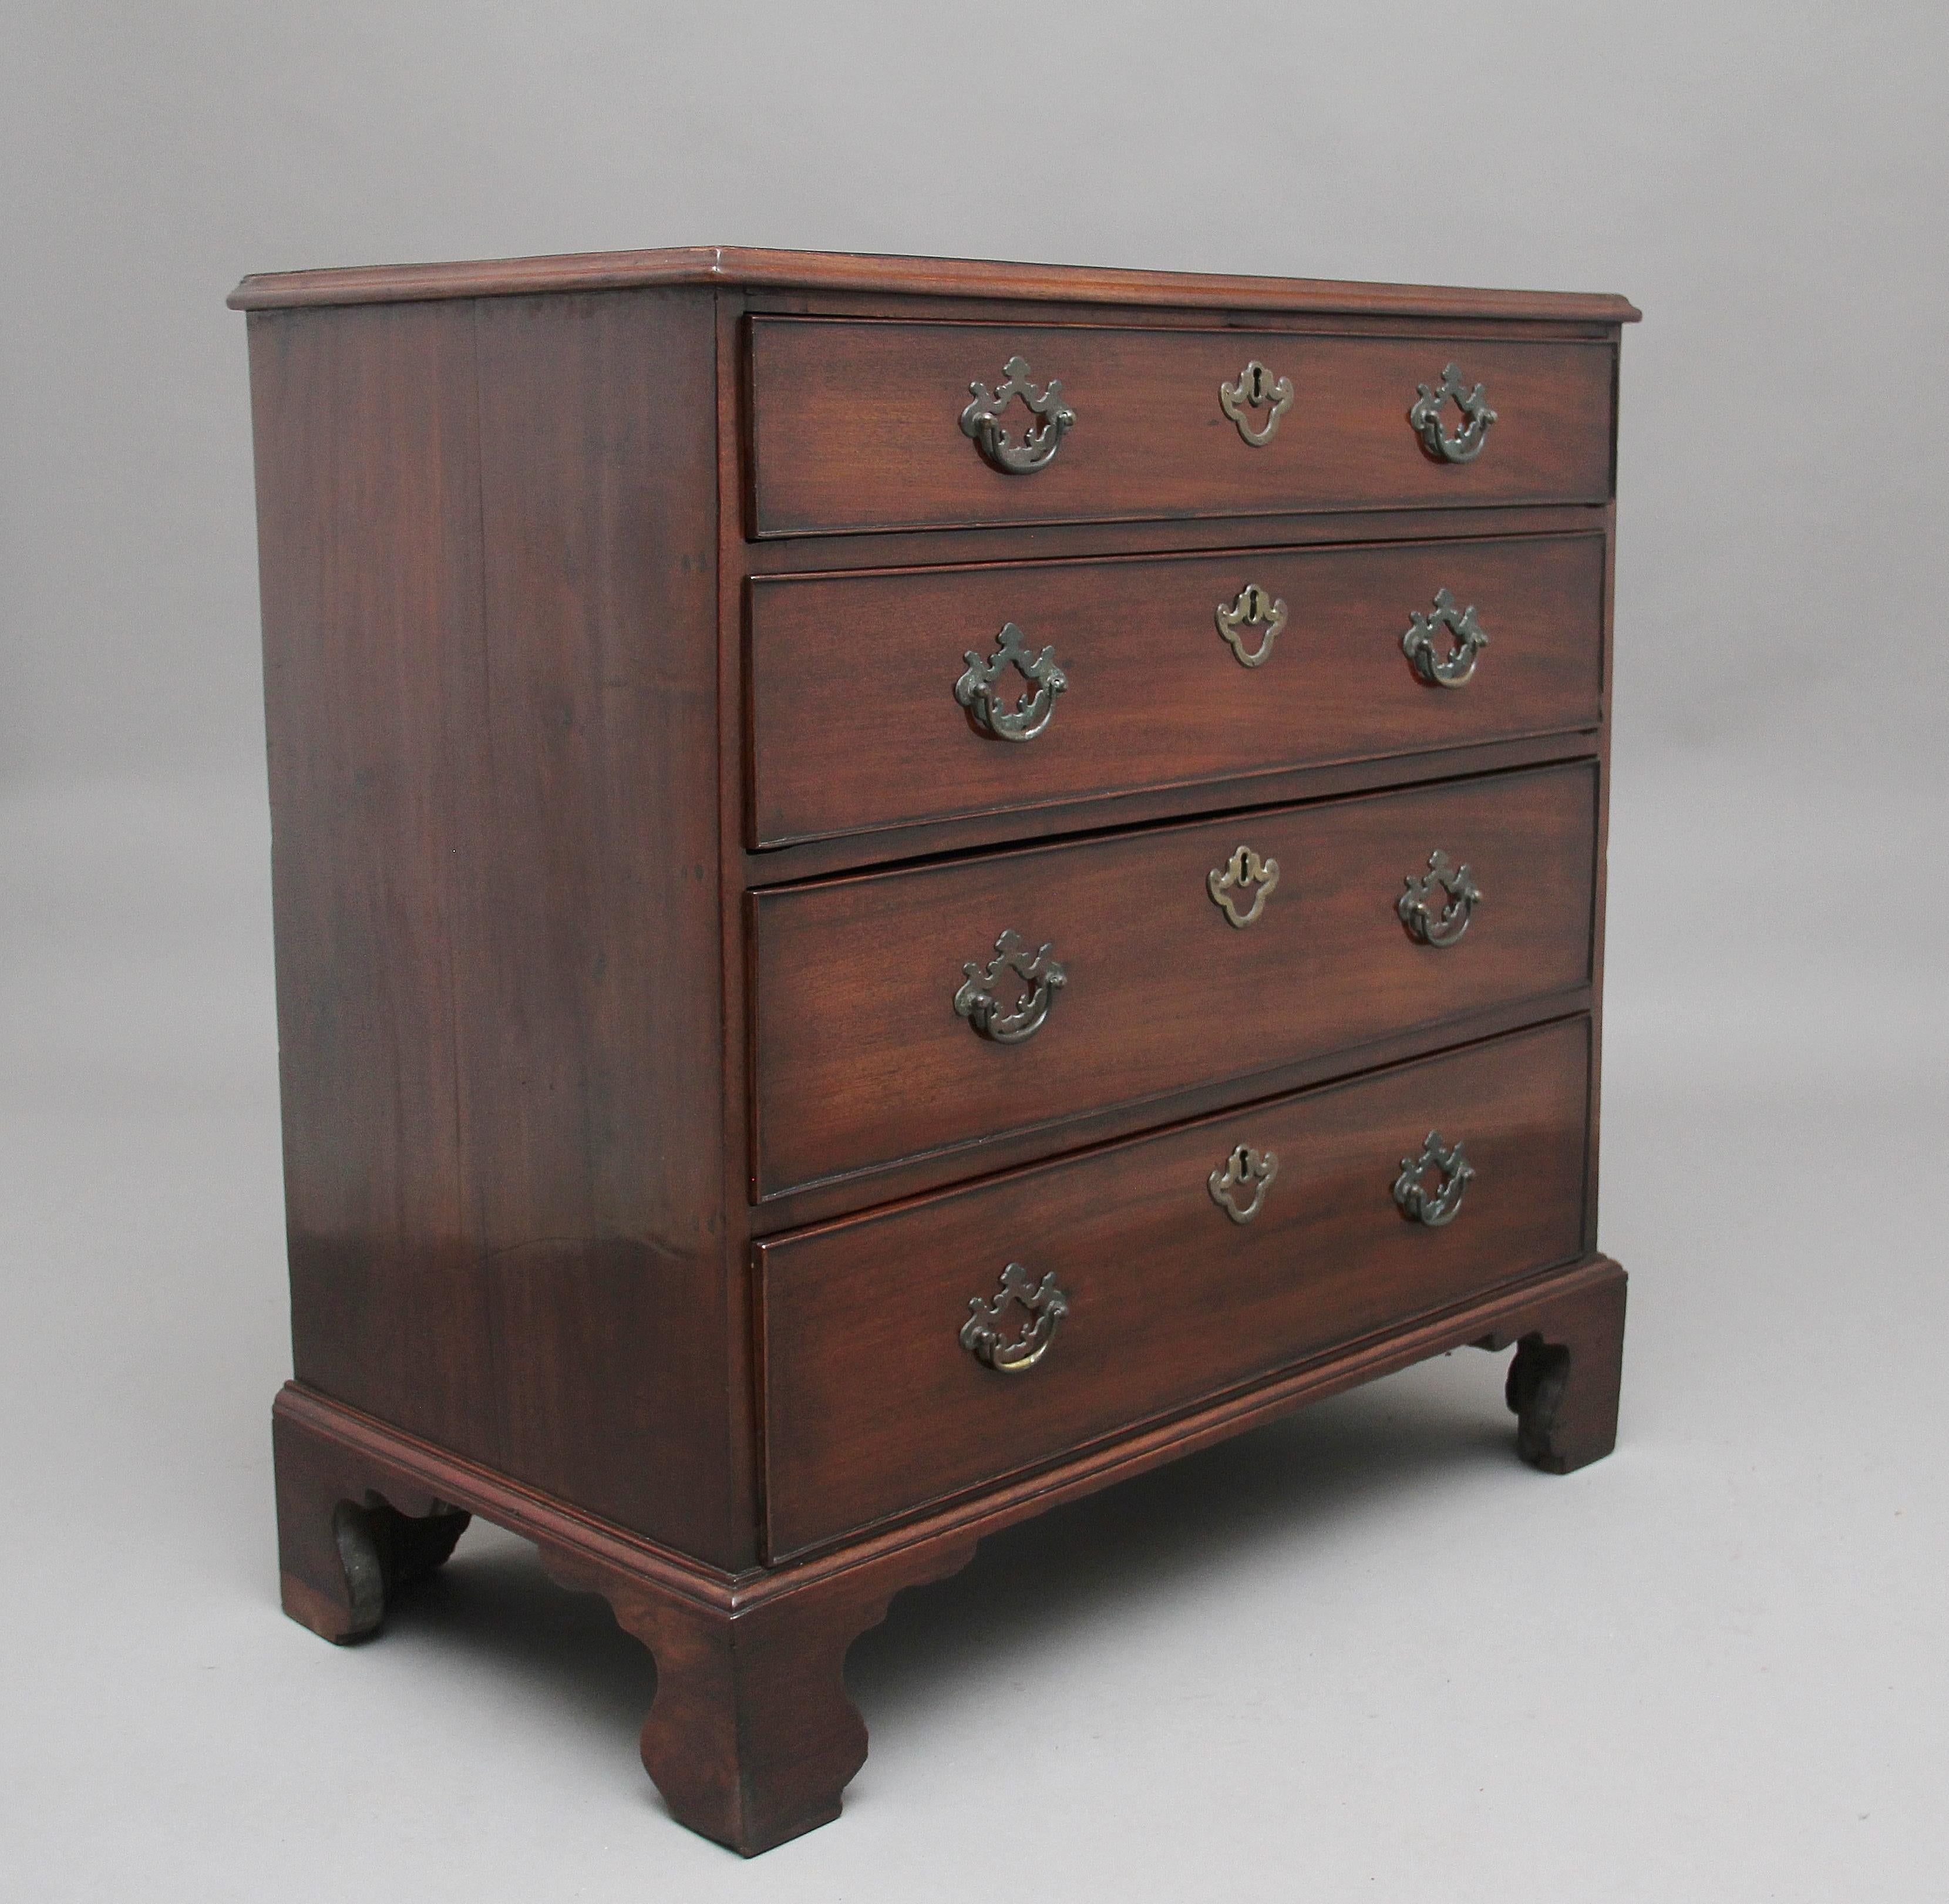 A lovely quality 18th century mahogany chest of drawers of good proportions, the moulded edge top above four long graduated oak lined drawers having brass plate handles and escutcheons, standing on shaped bracket feet. Lovely color and in excellent